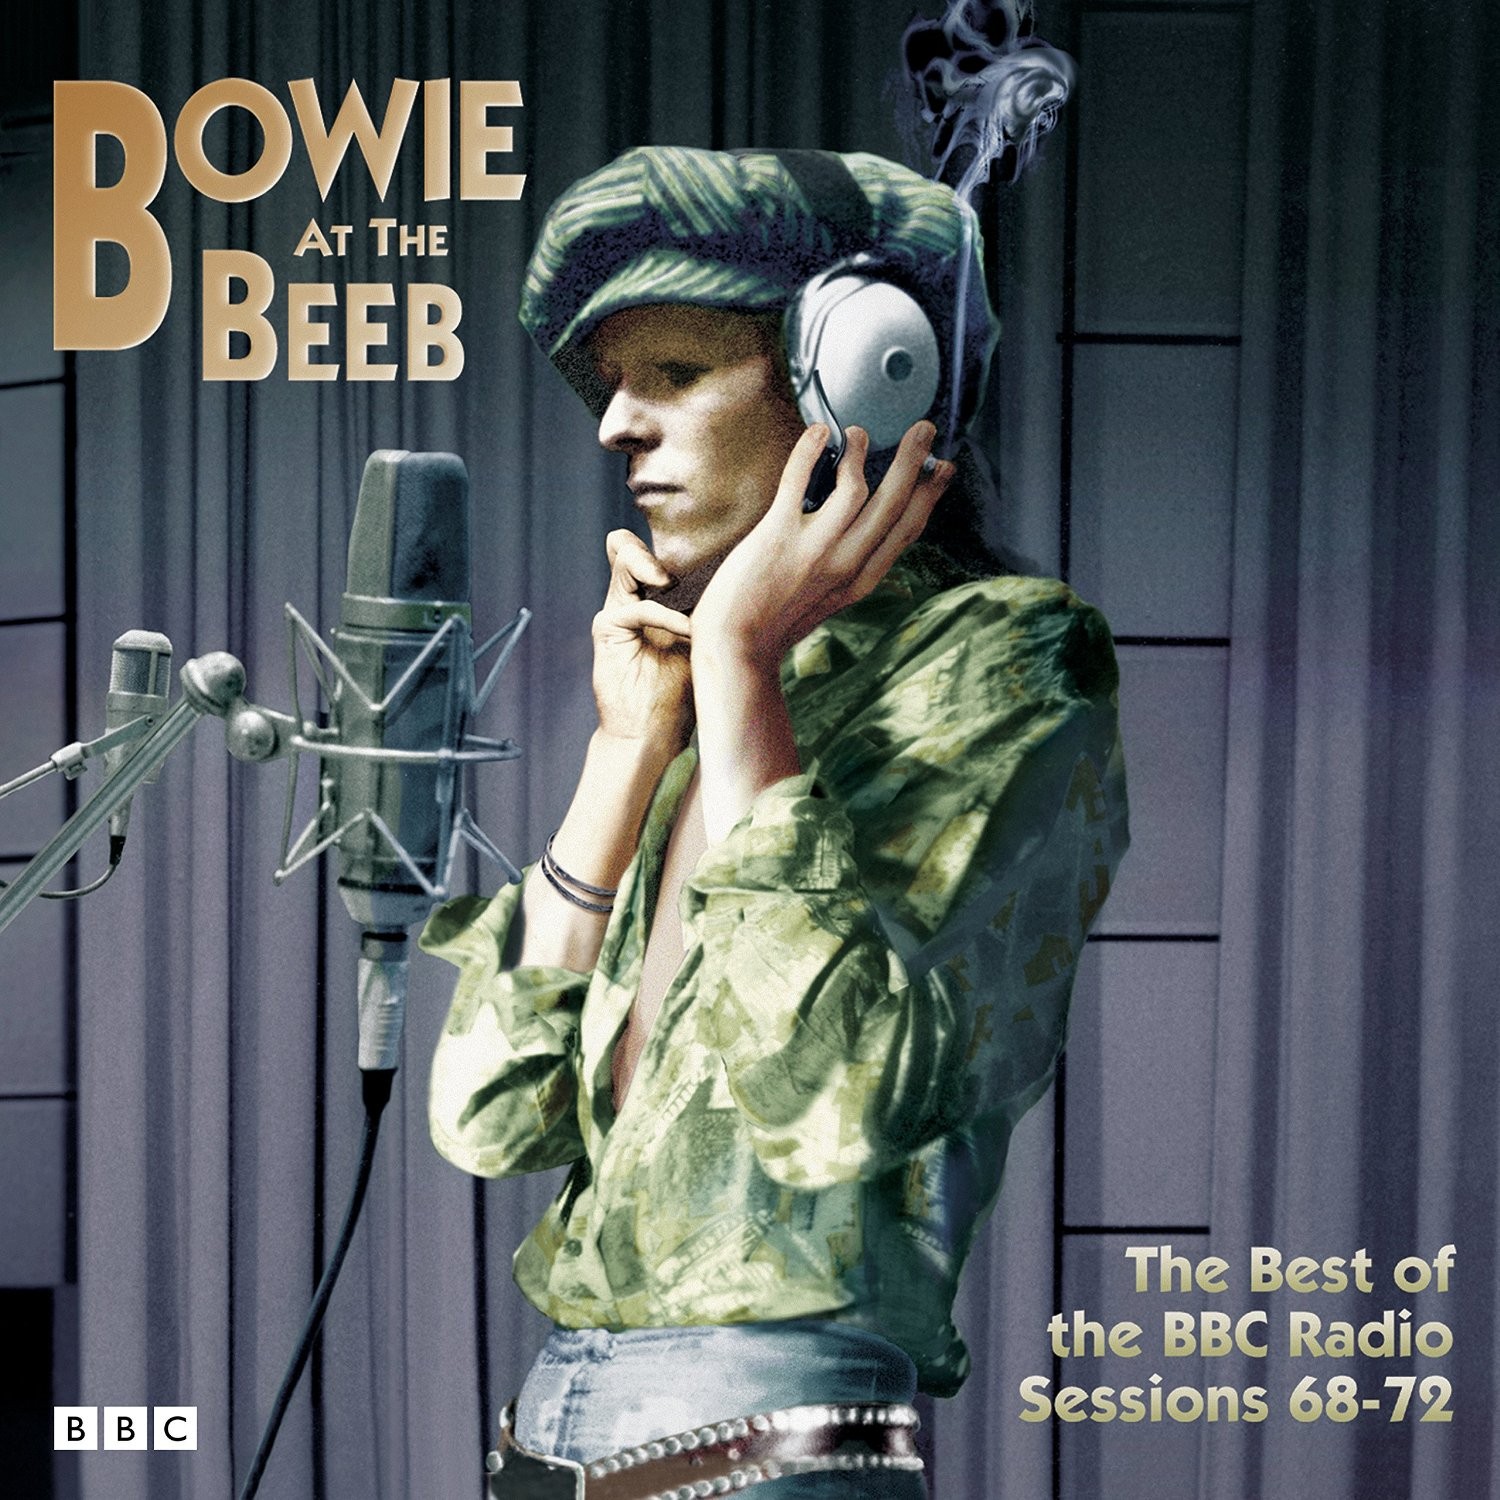 David Bowie - Bowie At The Beeb: The Best Of The BBC Radio Sessions '68-'72 4XLP 